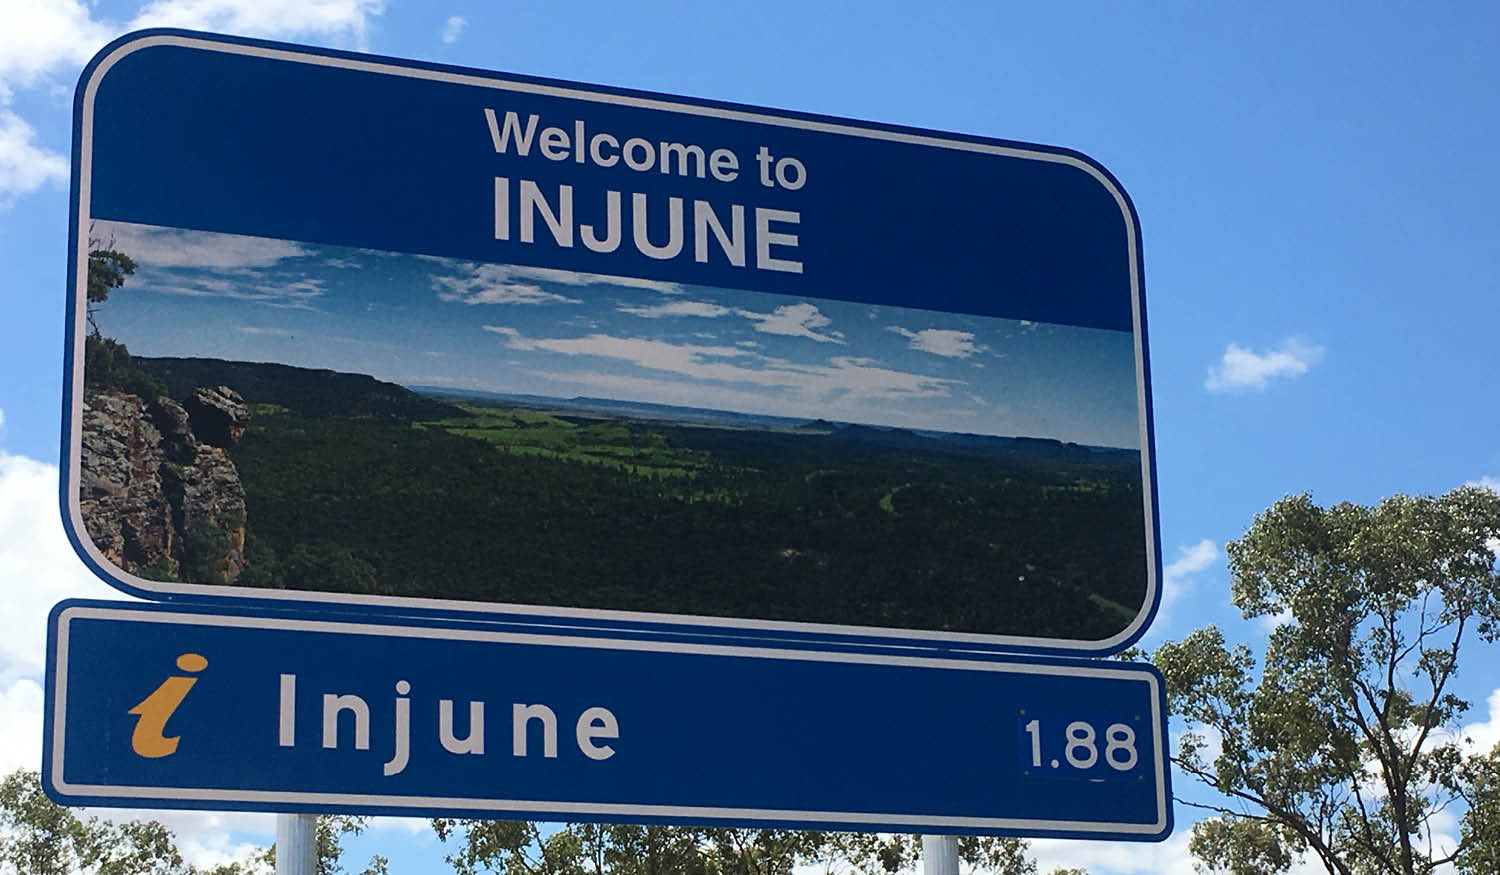 Injune welcome sign